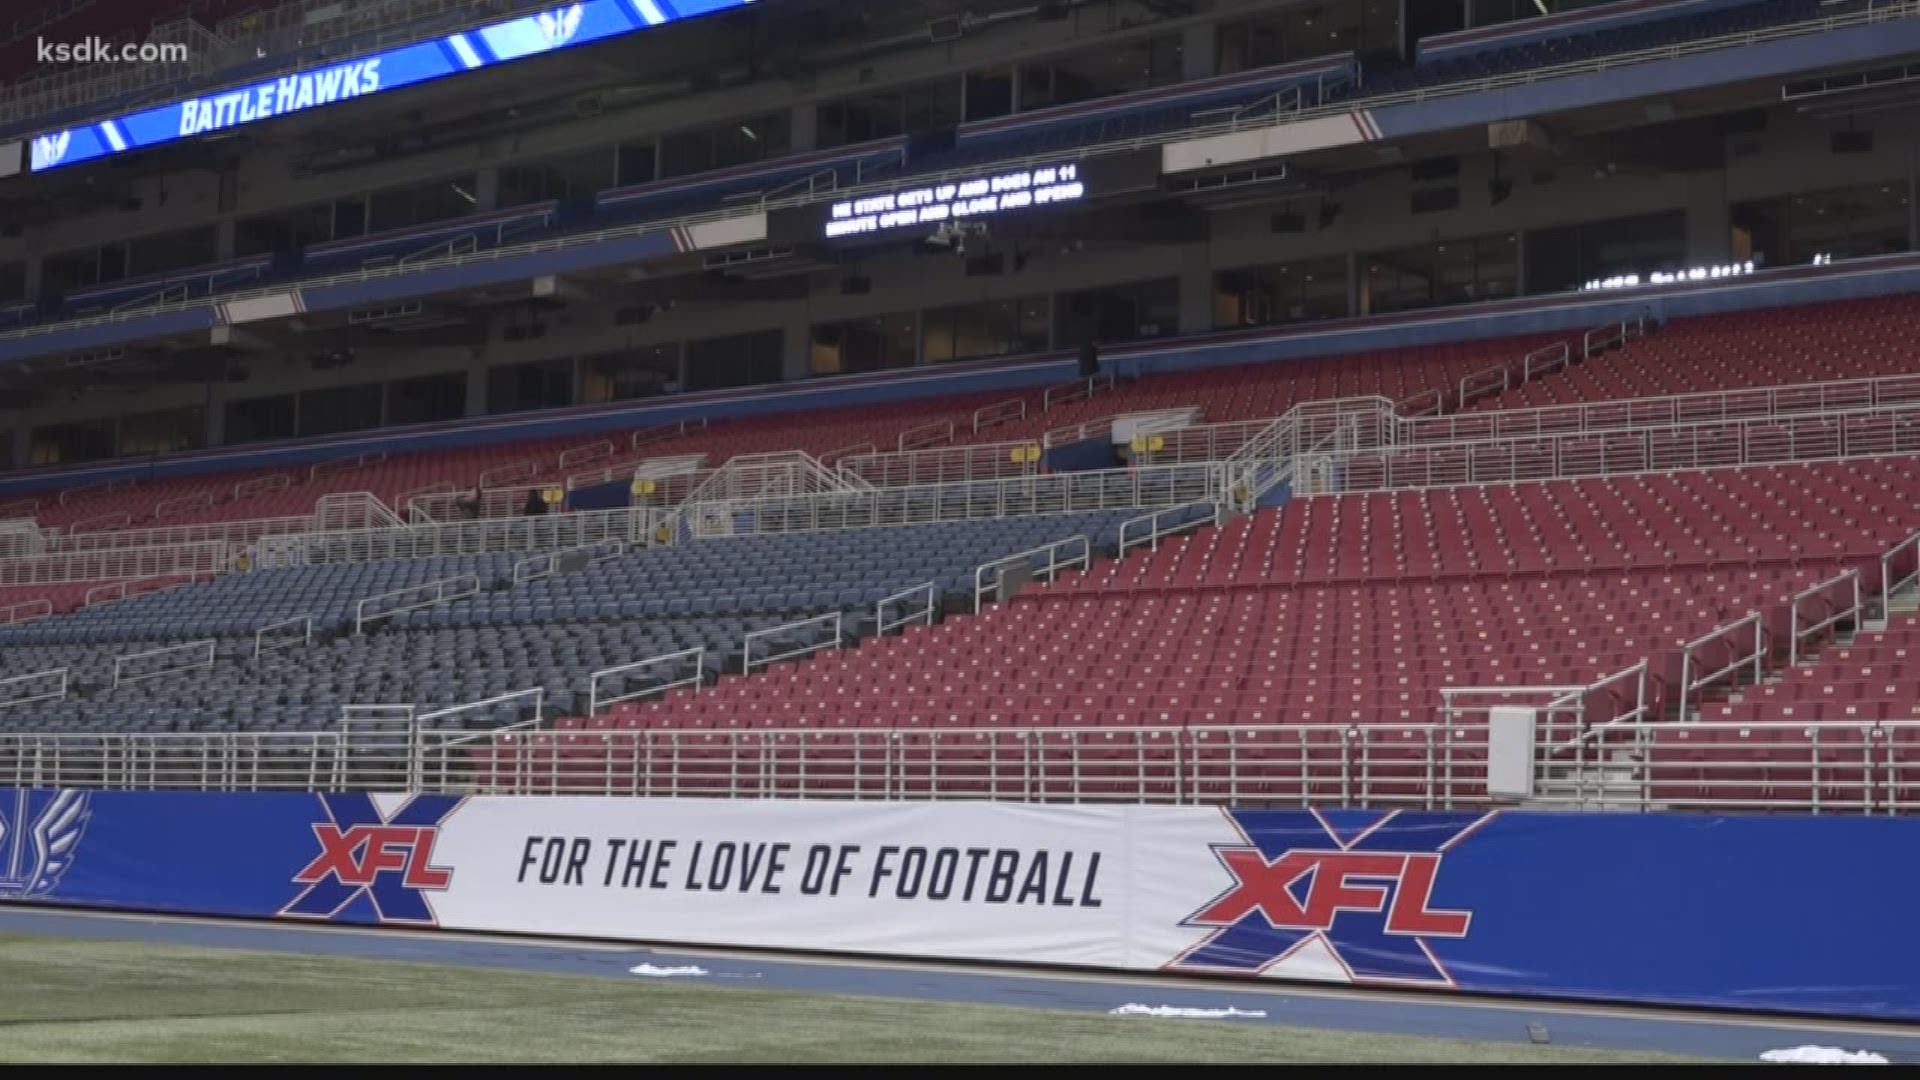 After nearly five years, there will finally be a home professional football game at the dome.